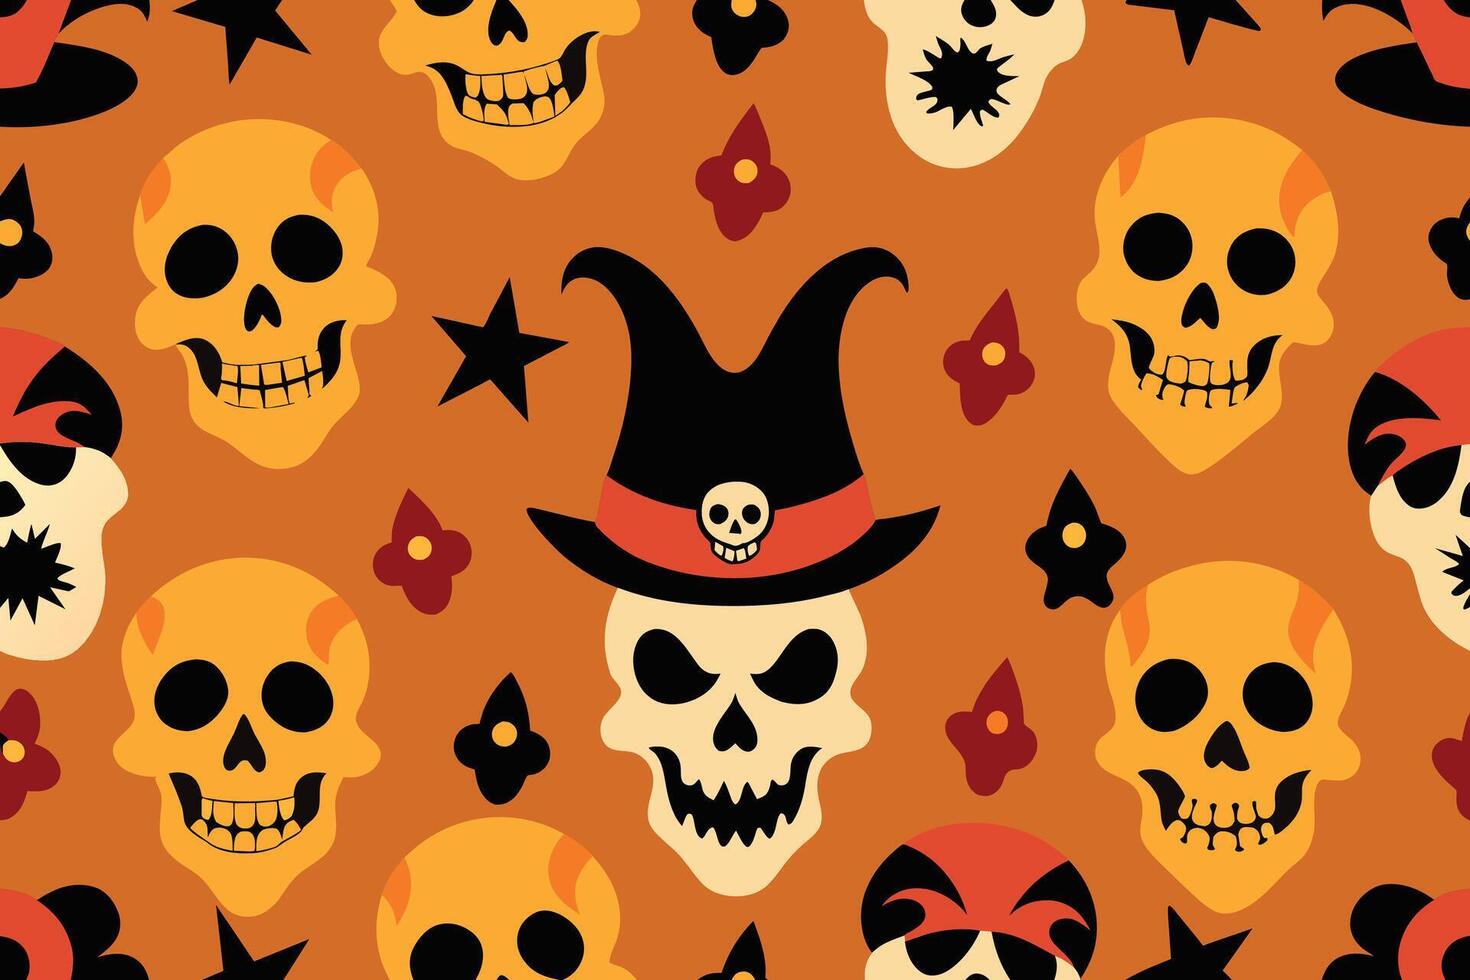 Seamless pattern on tattoo theme with skulls and clown masks vector